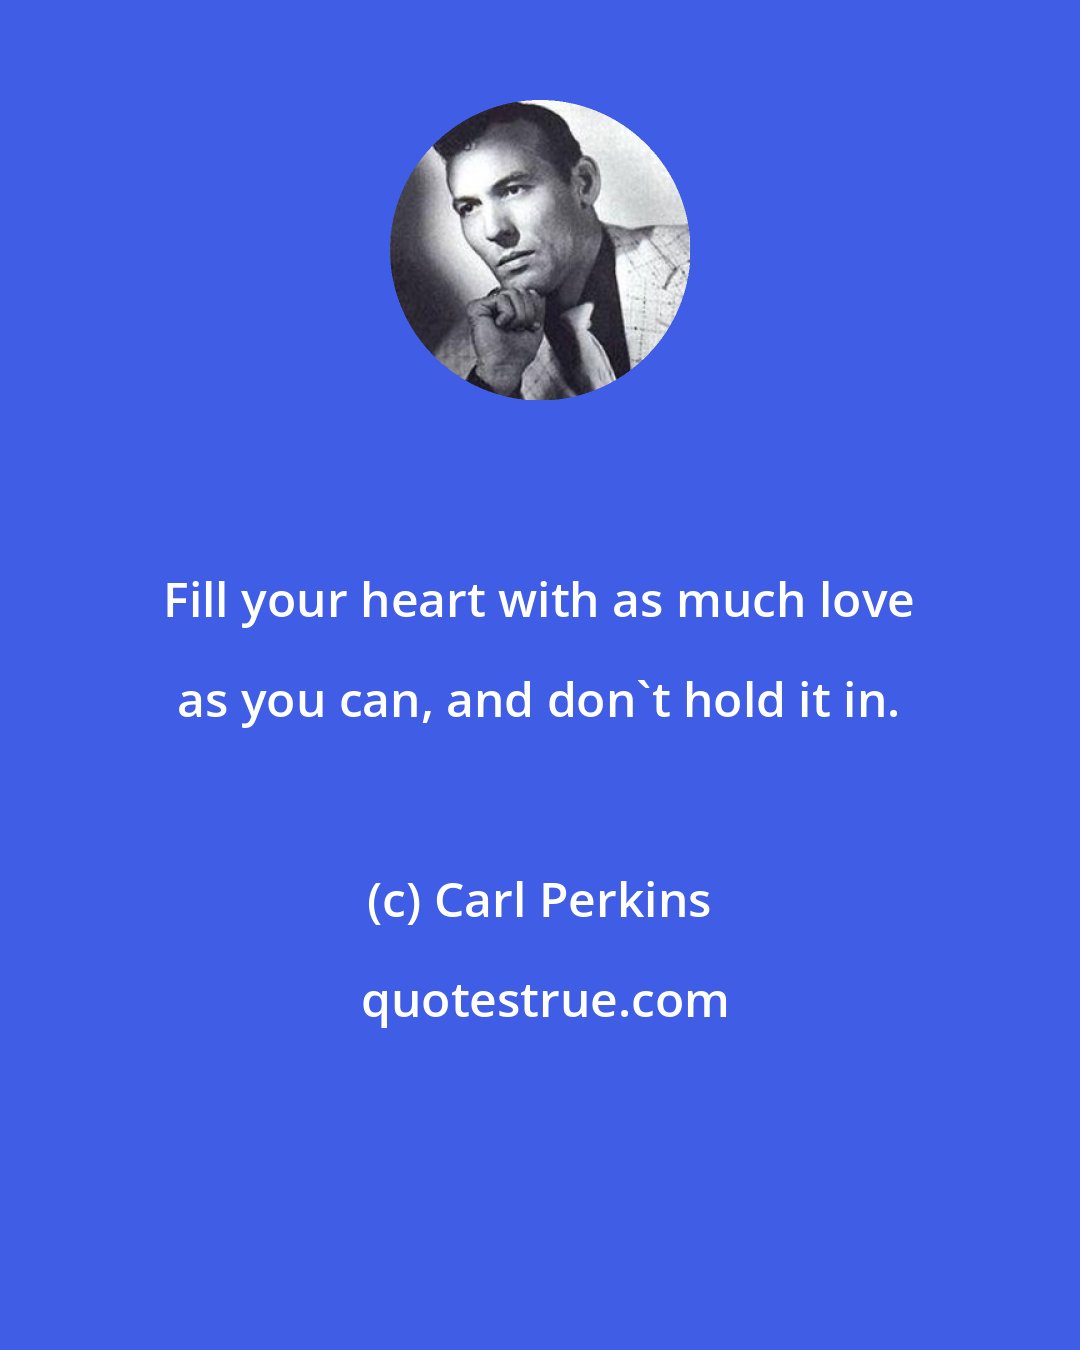 Carl Perkins: Fill your heart with as much love as you can, and don't hold it in.